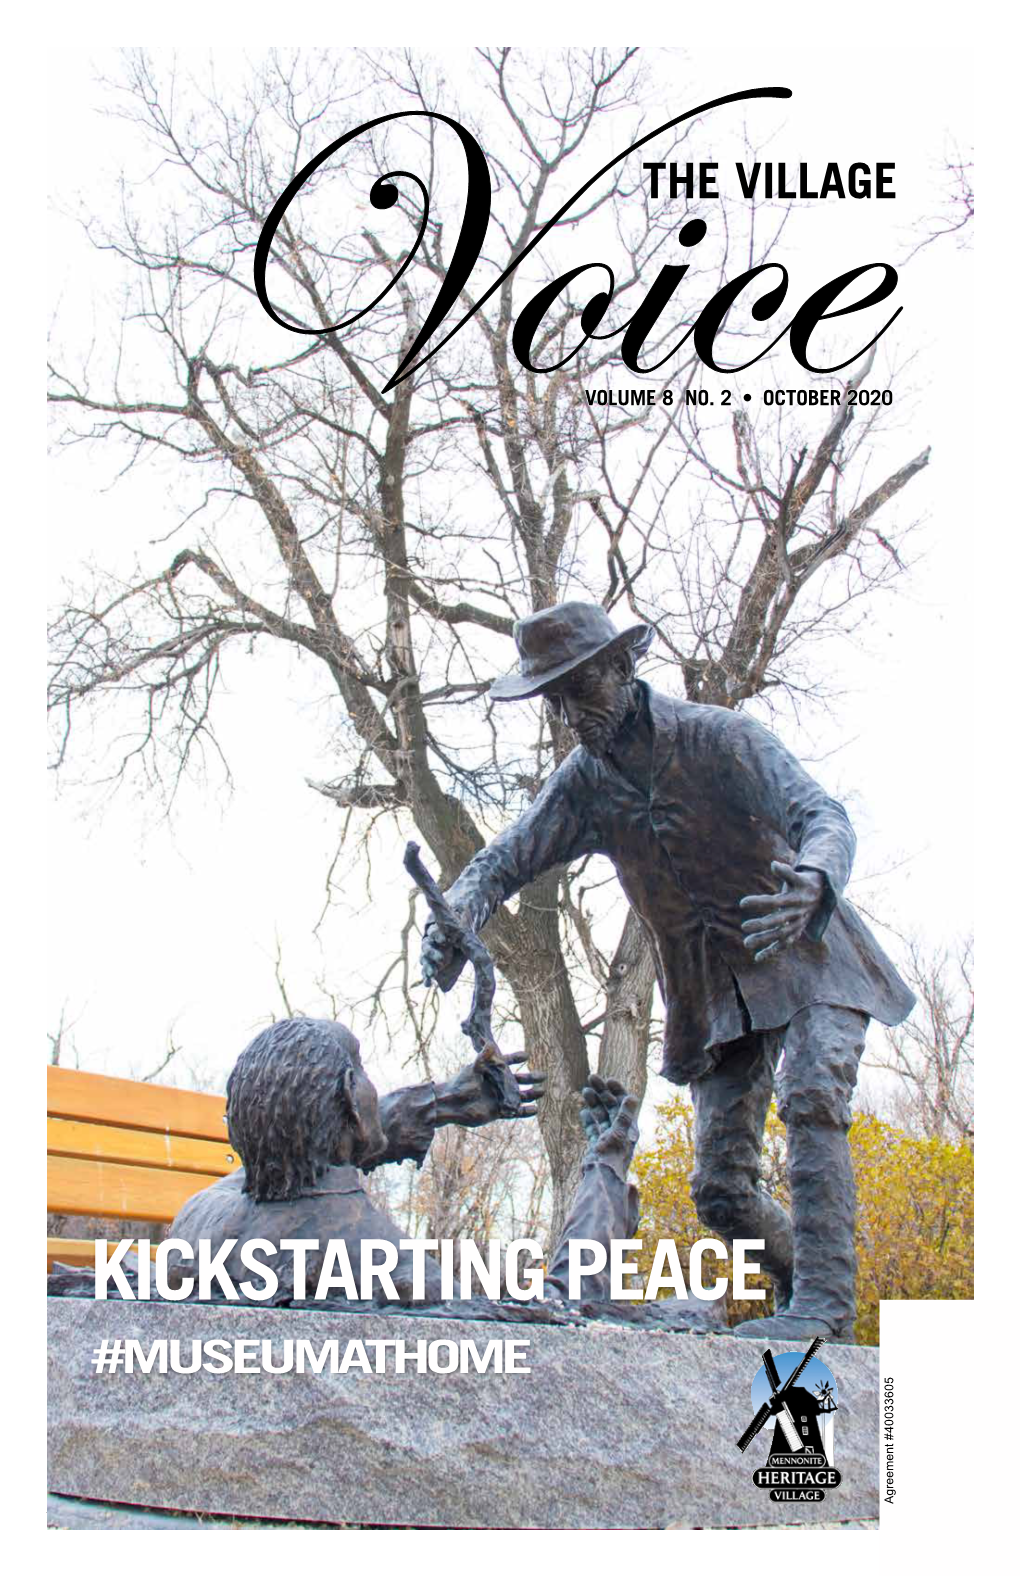 KICKSTARTING PEACE #MUSEUMATHOME Agreement #40033605Agreement MAY 2013 1 PUBLISHED by Mennonite Heritage Village (Canada) Inc